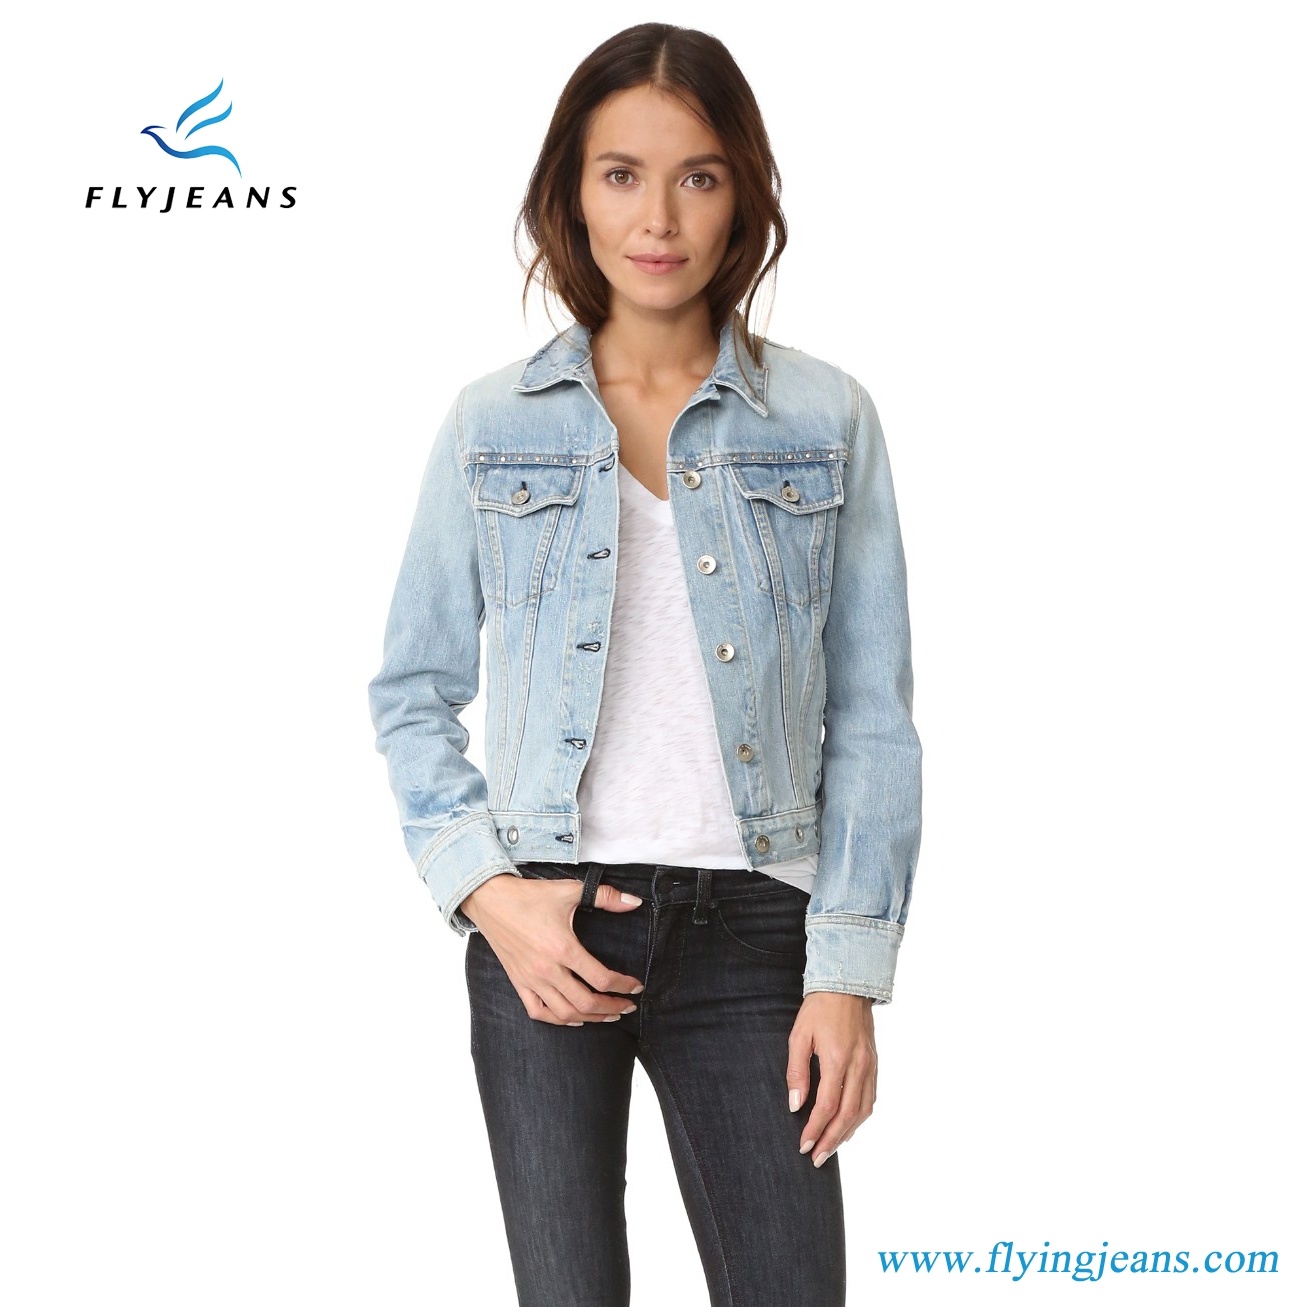 Lovely Short Women Denim Jeans Jacket with Faded Wash